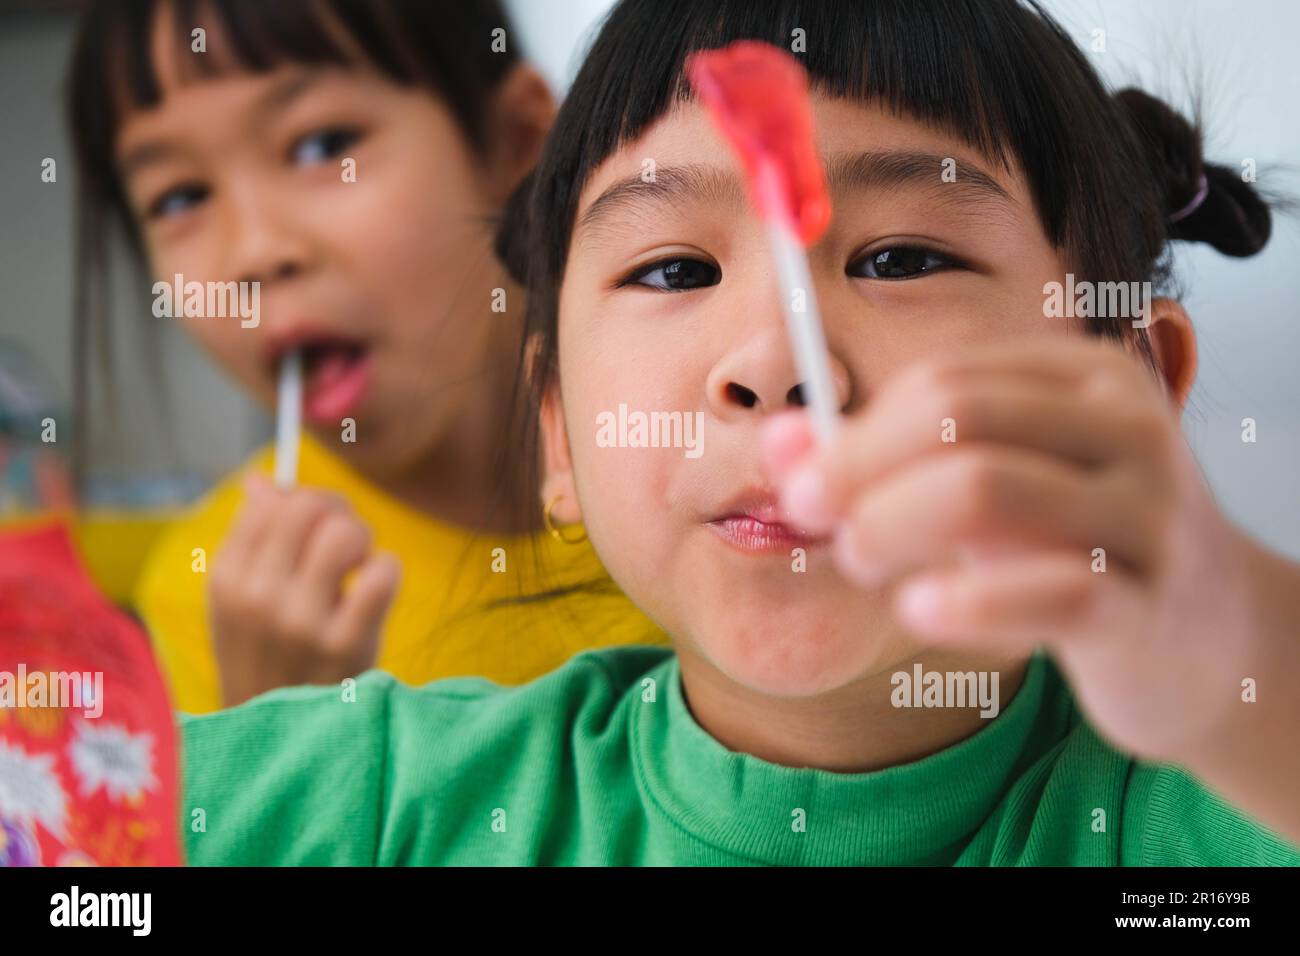 Two happy cute little girls eating lollipops. Funny kid with lollipop candy. Child eating sweets. Stock Photo